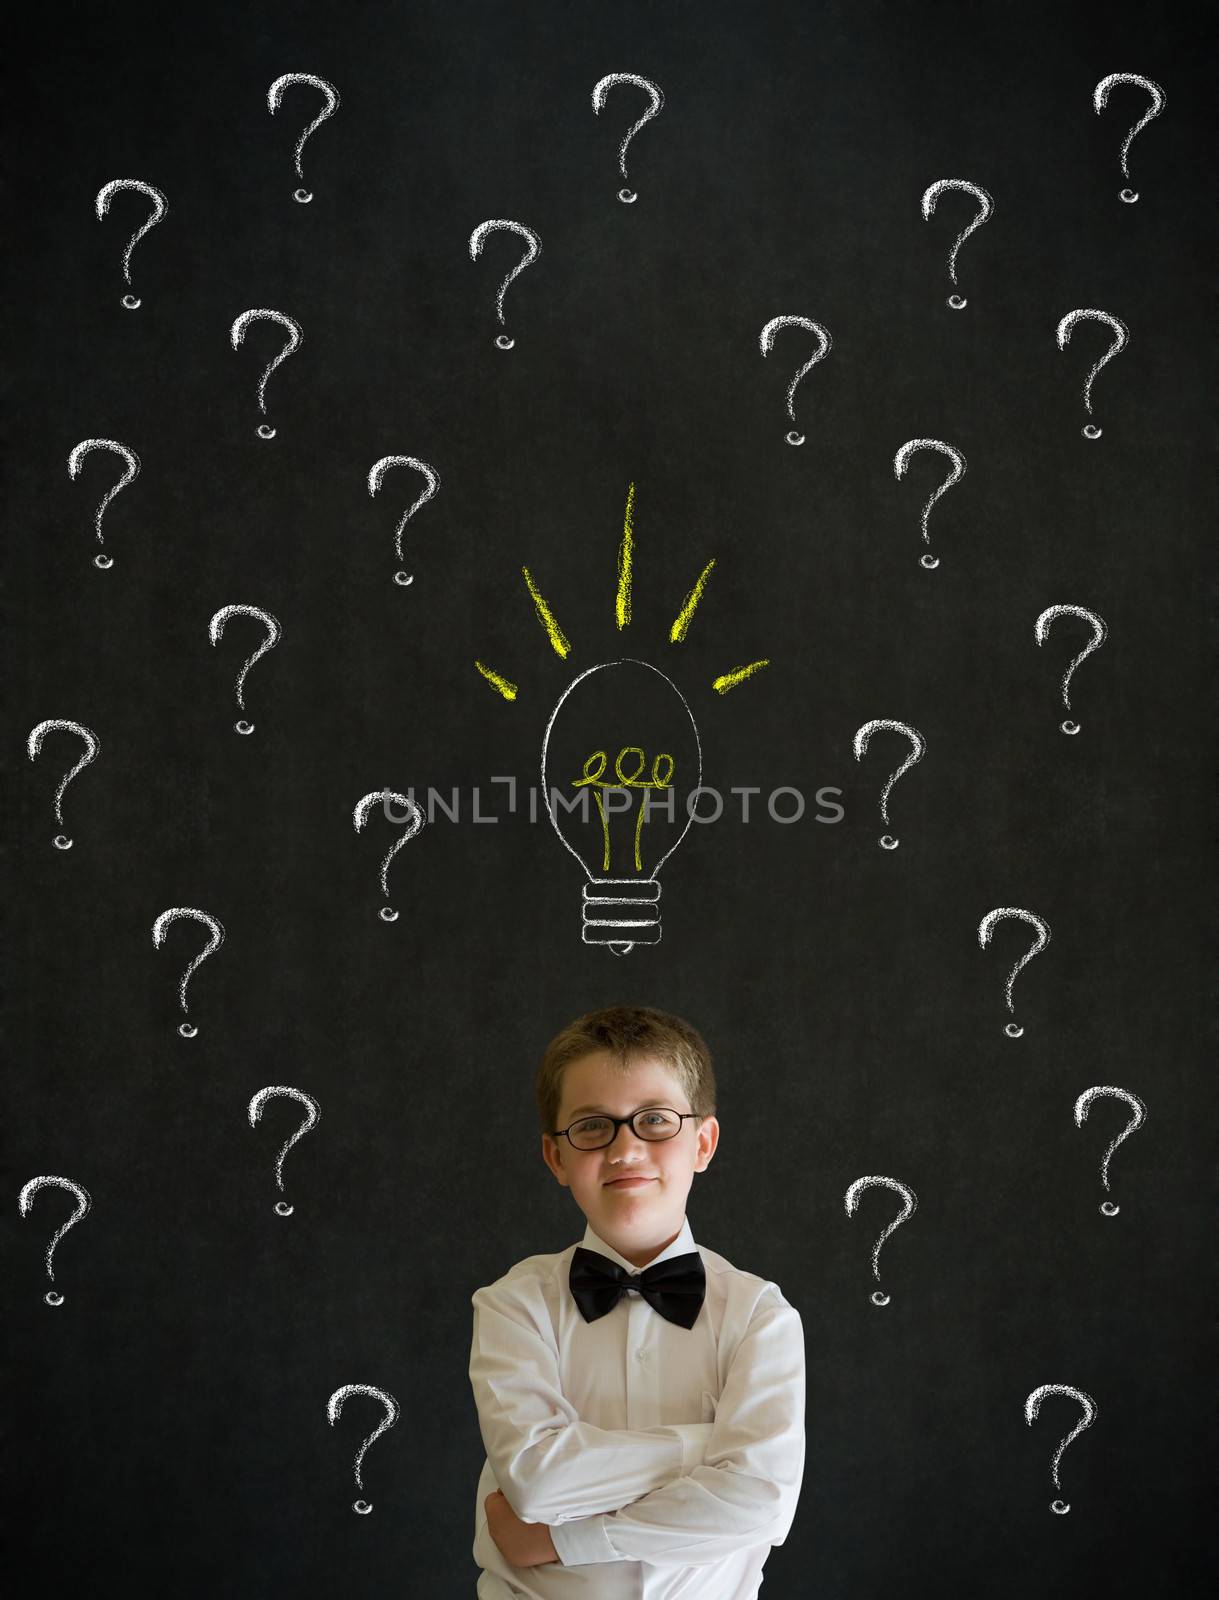 Thinking boy dressed up as business man questioning ideas by alistaircotton